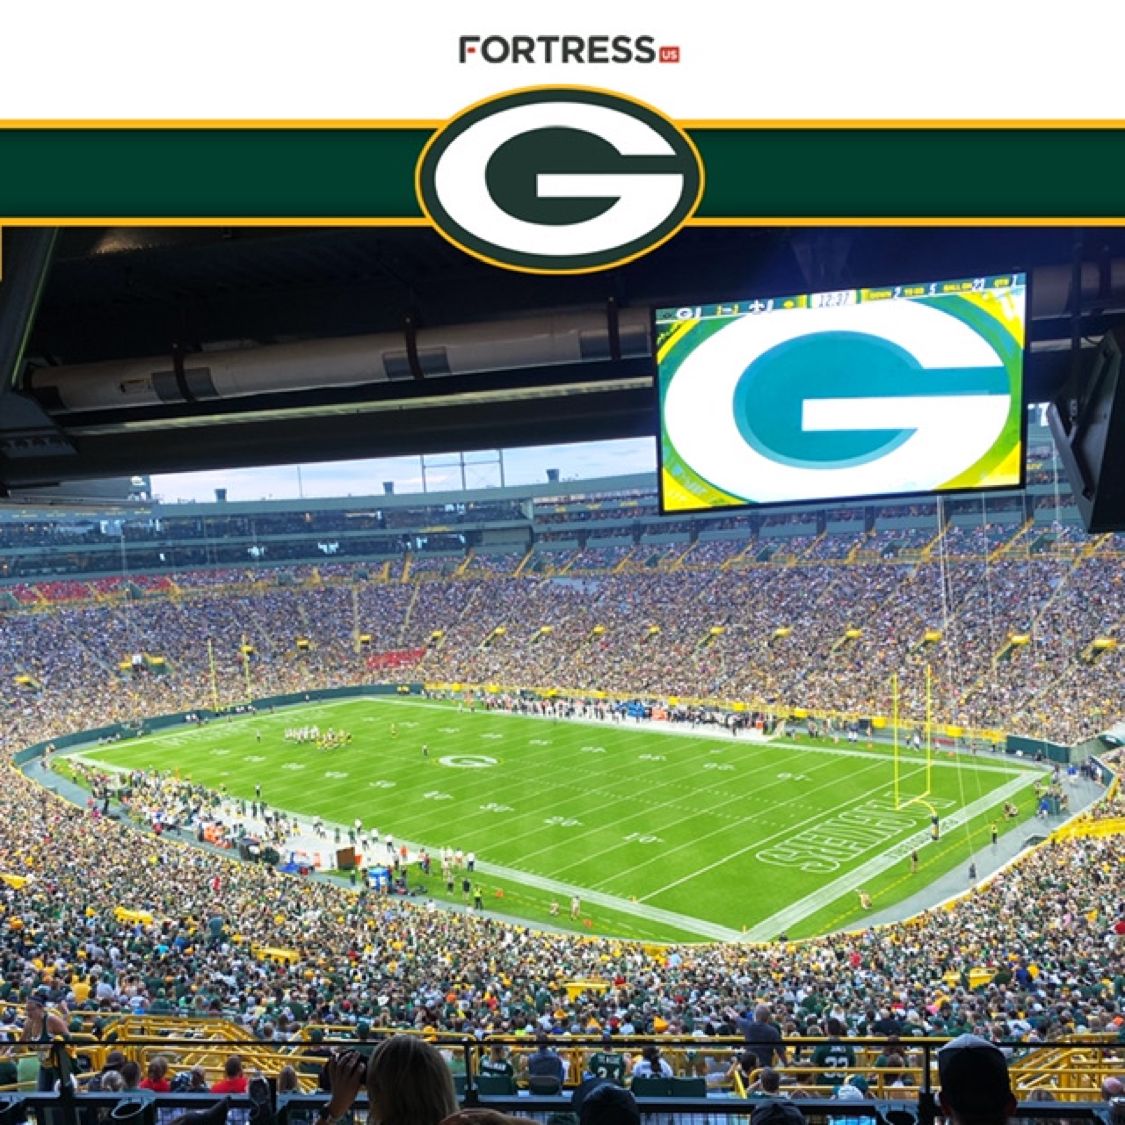 Fortress Welcomes the Green Bay Packers